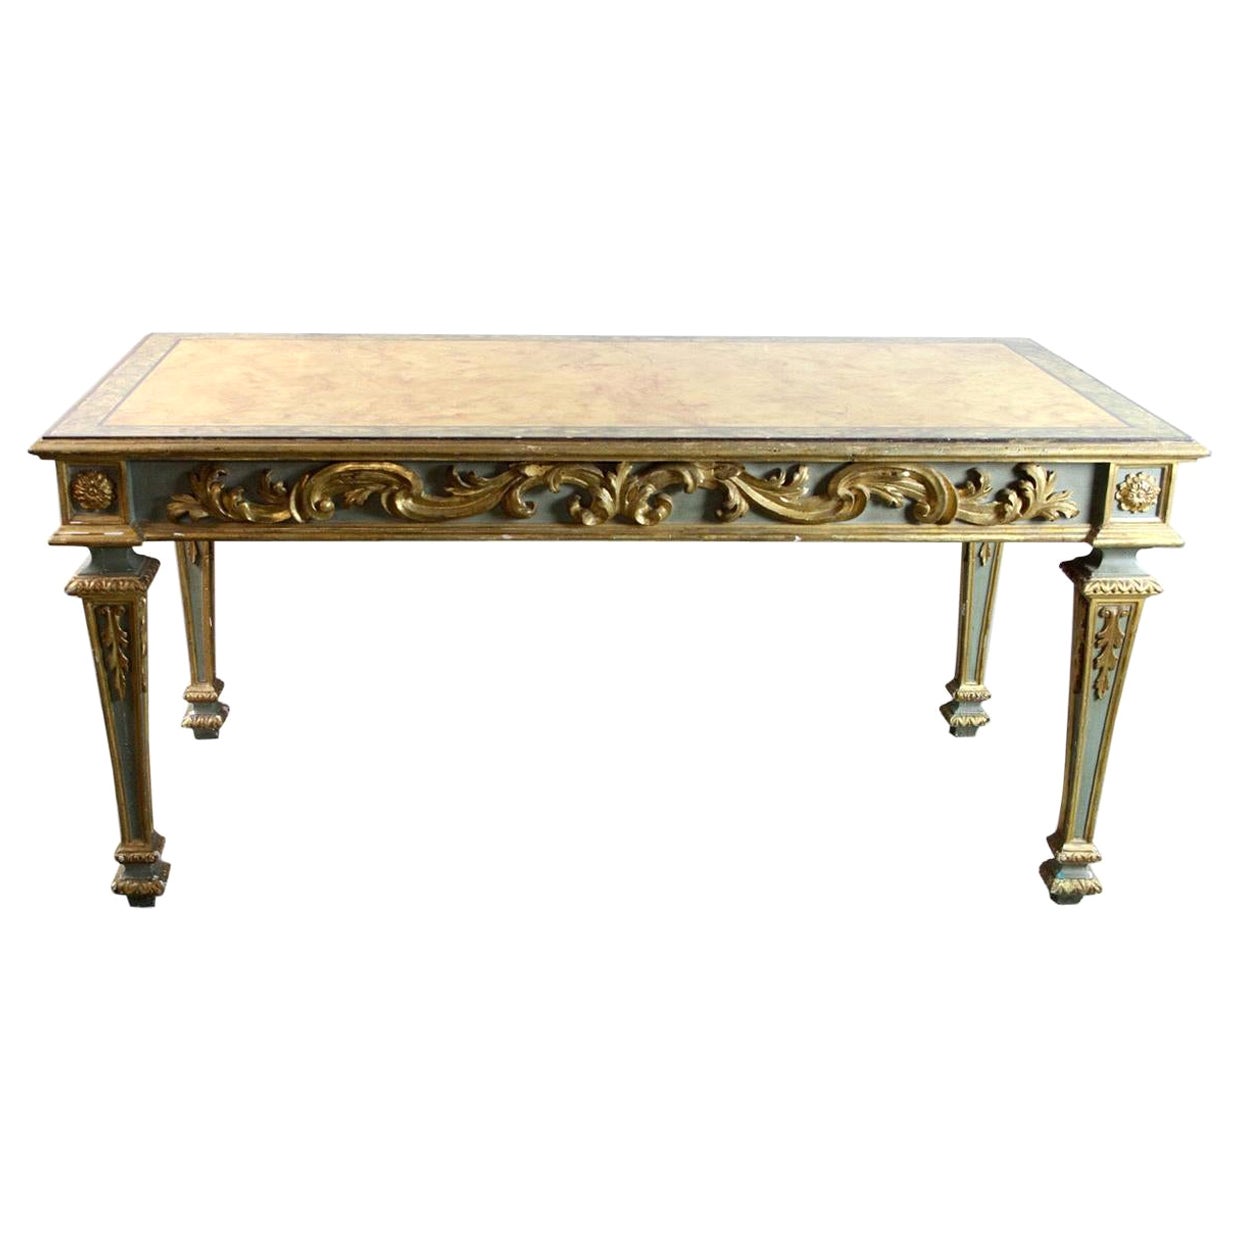 19th Century Italian Carved Green and Gilt Foyer Table with Faux Marble Top For Sale